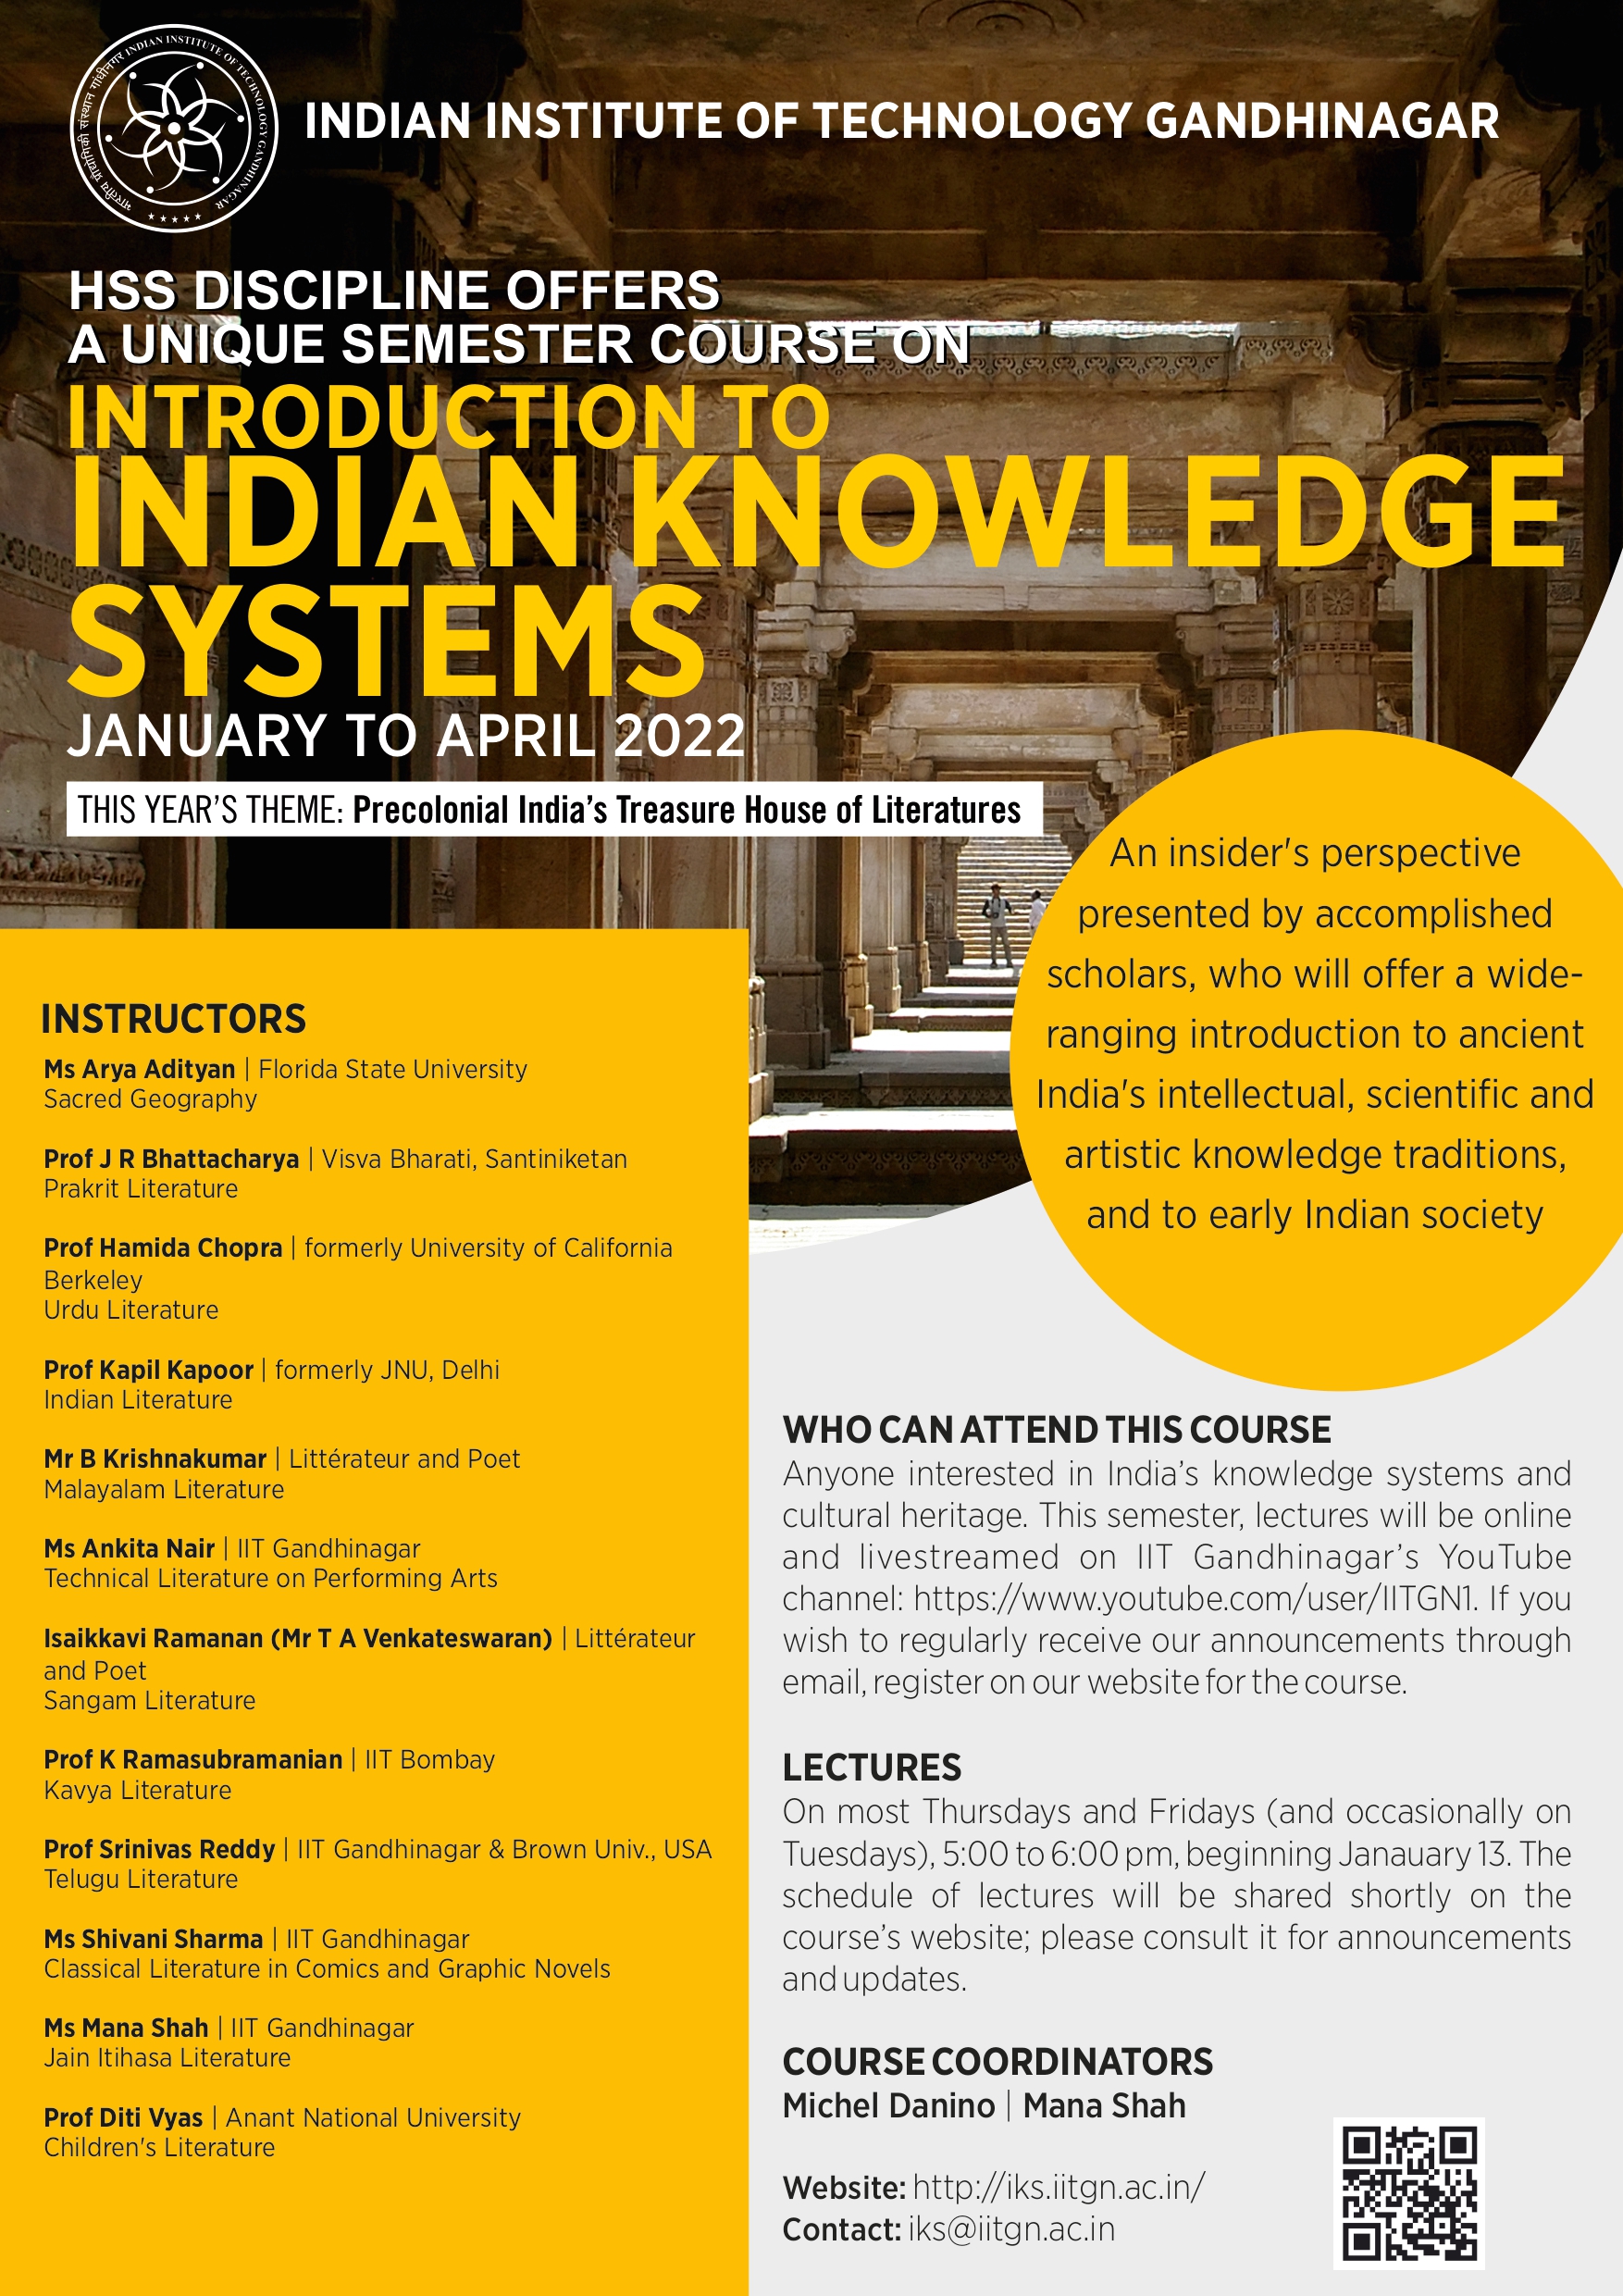 A course on Indian knowledge systems at IIT Gandhinagar